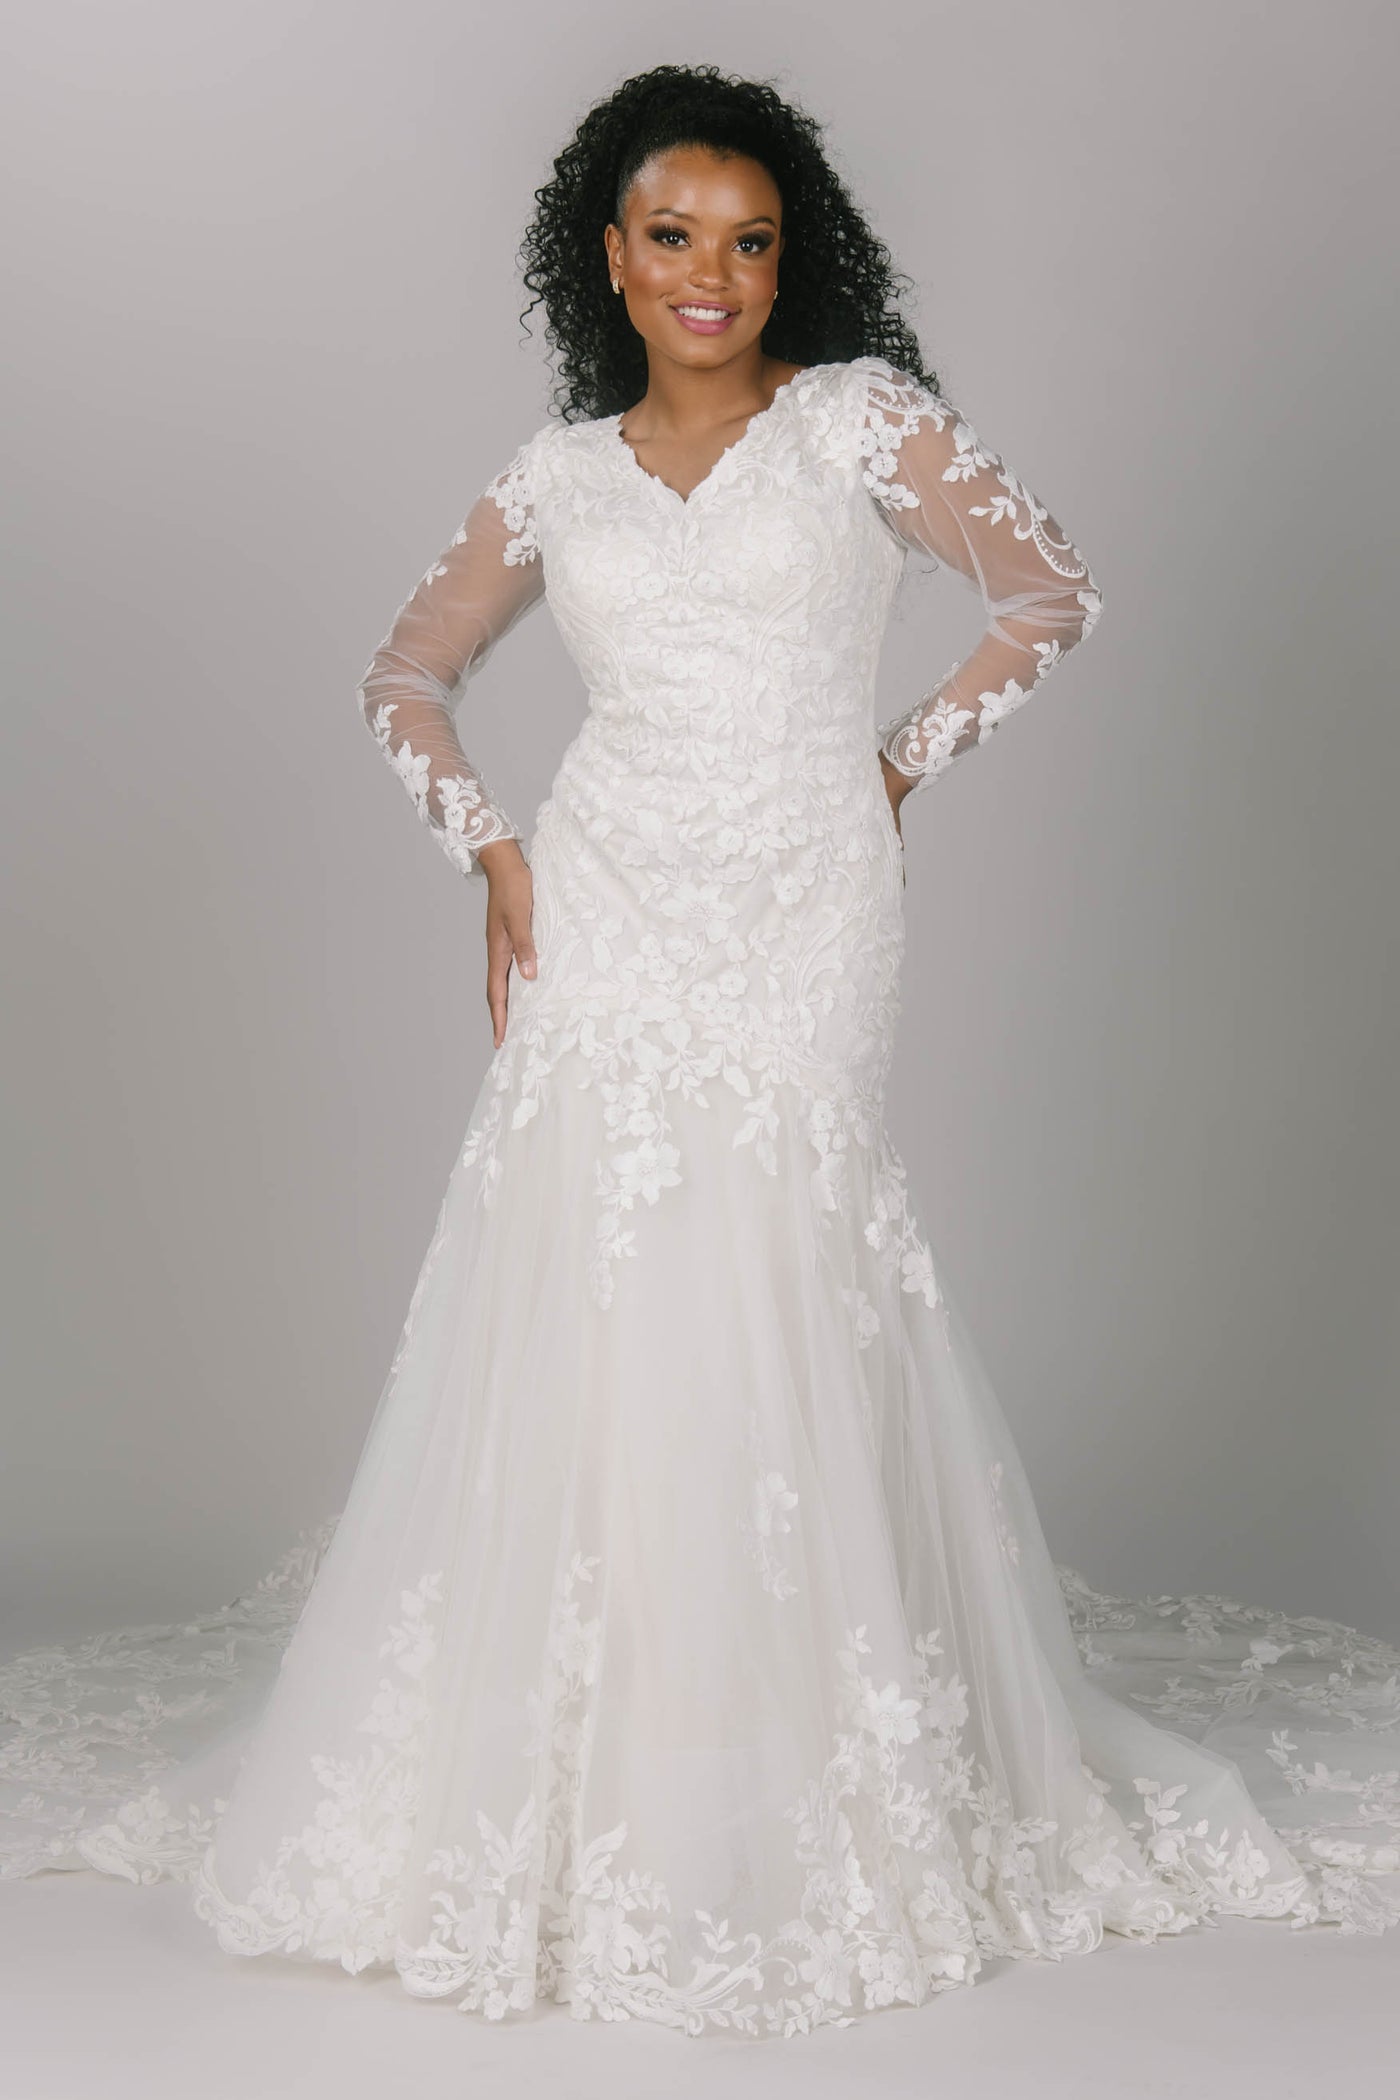 Front view of fitted modest wedding dress. This dress has flower/vine lace which creates a gorgeous lace train. It has long sleeves and a v-neckline. 